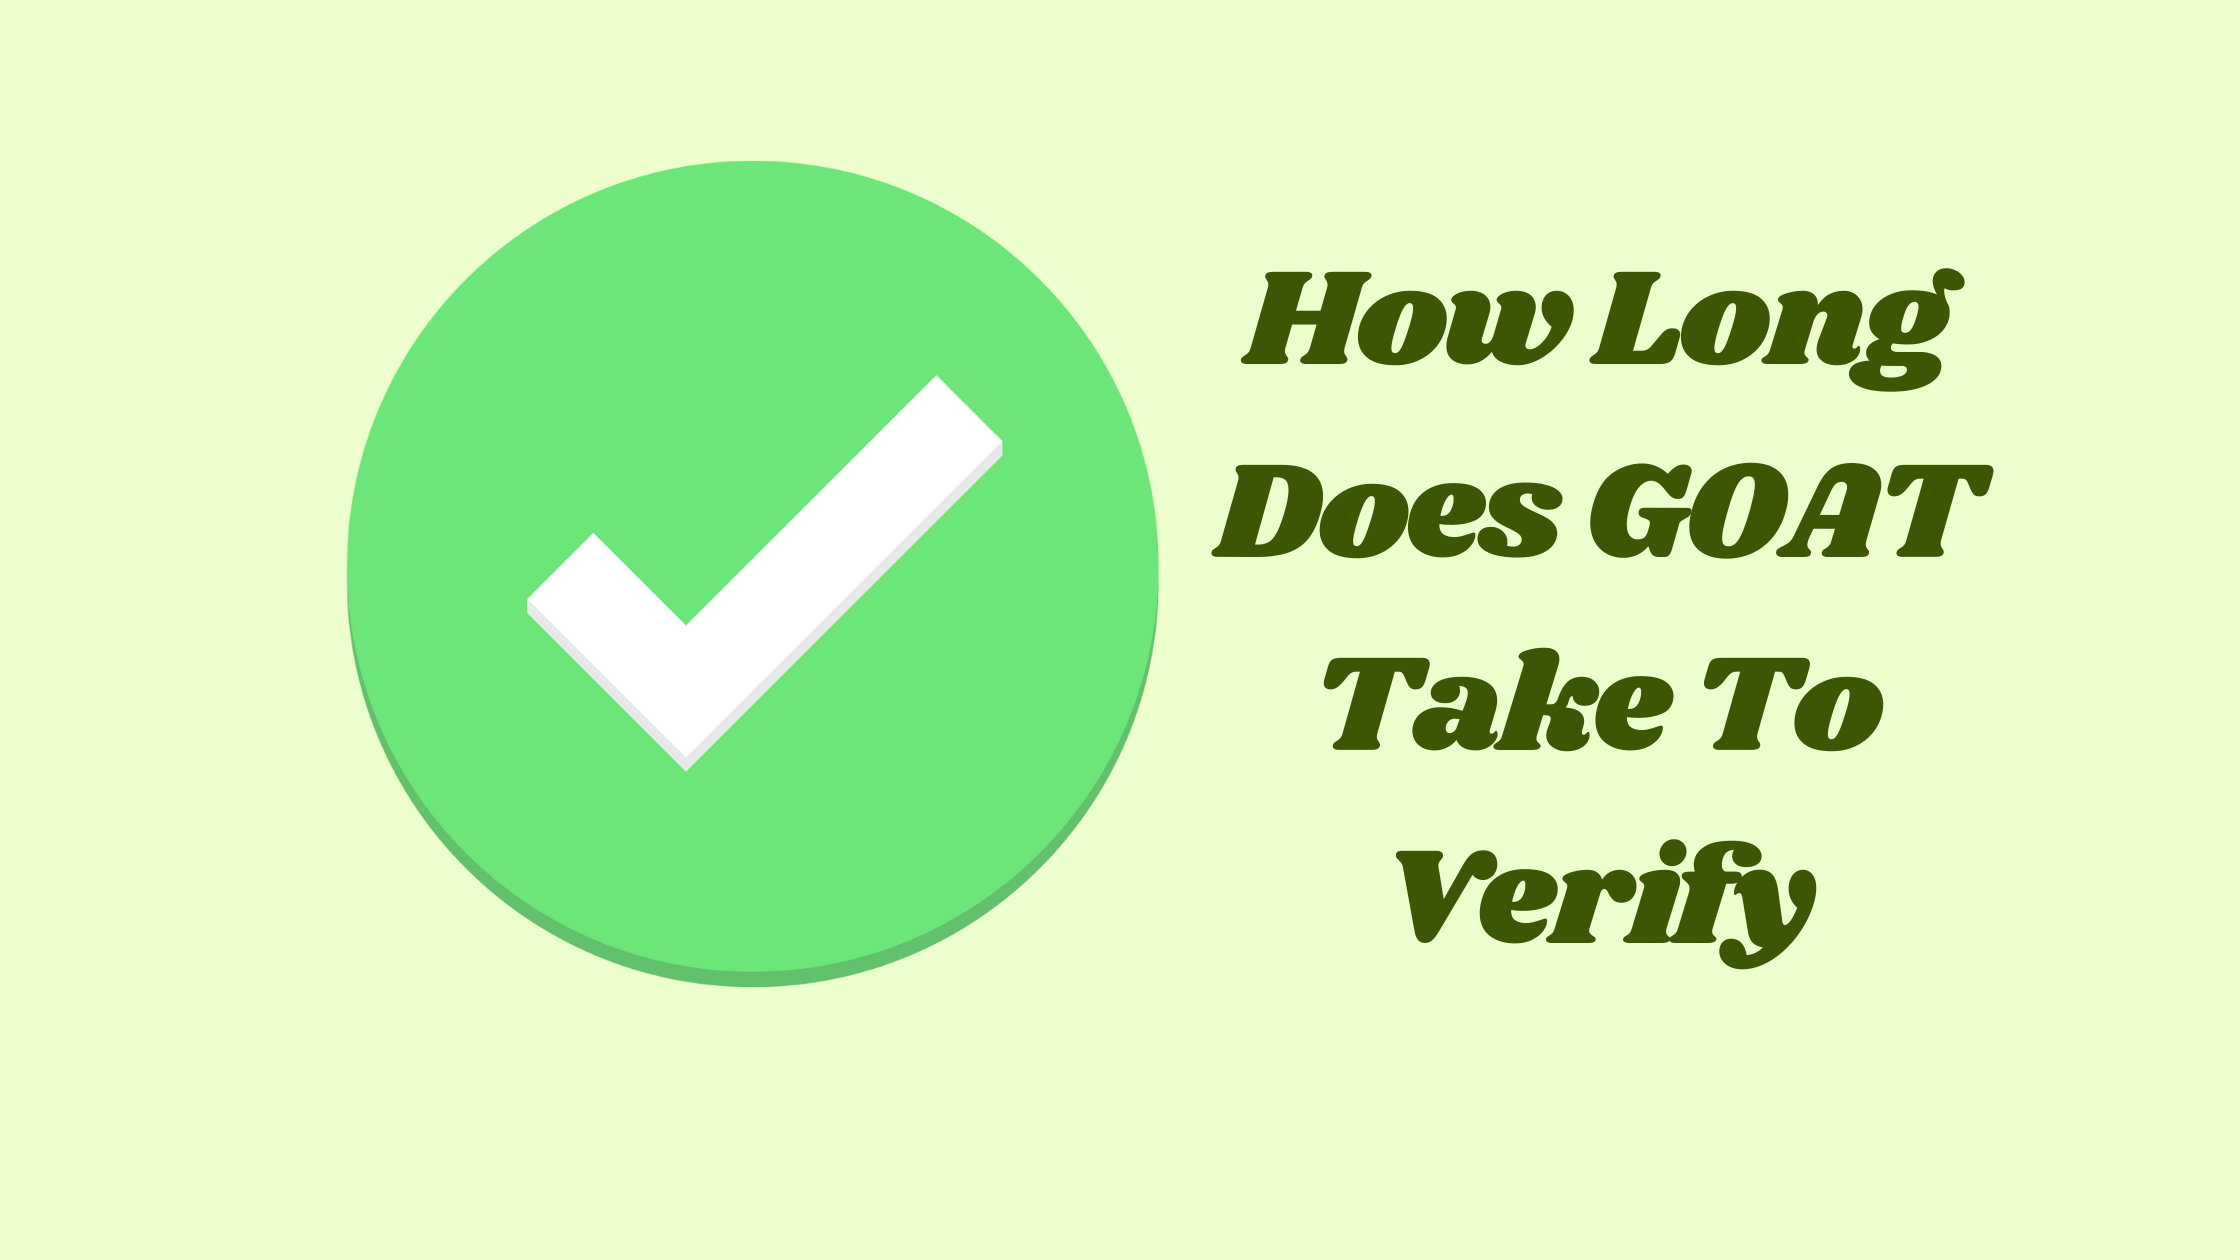 How Long Does GOAT Take To Verify